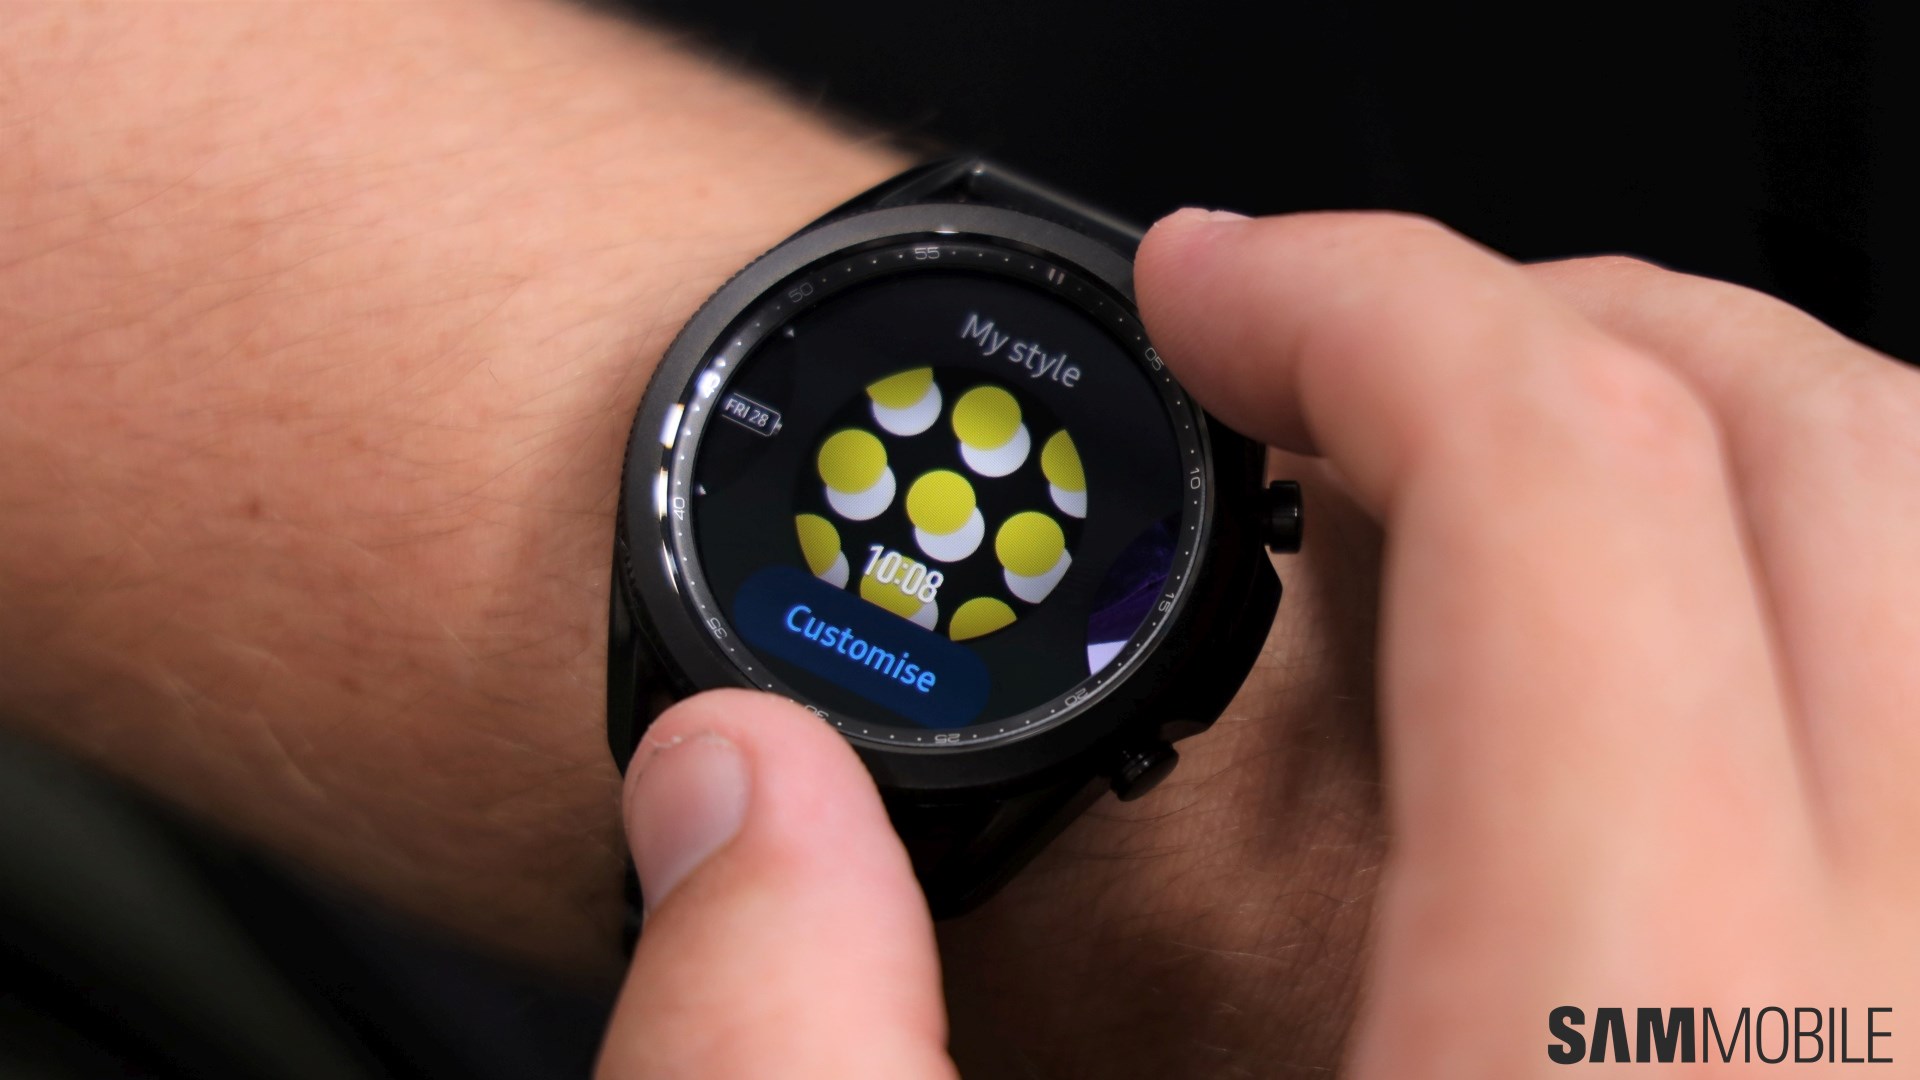 Samsung Galaxy Watch 3 review: small changes to a known formula - The Verge